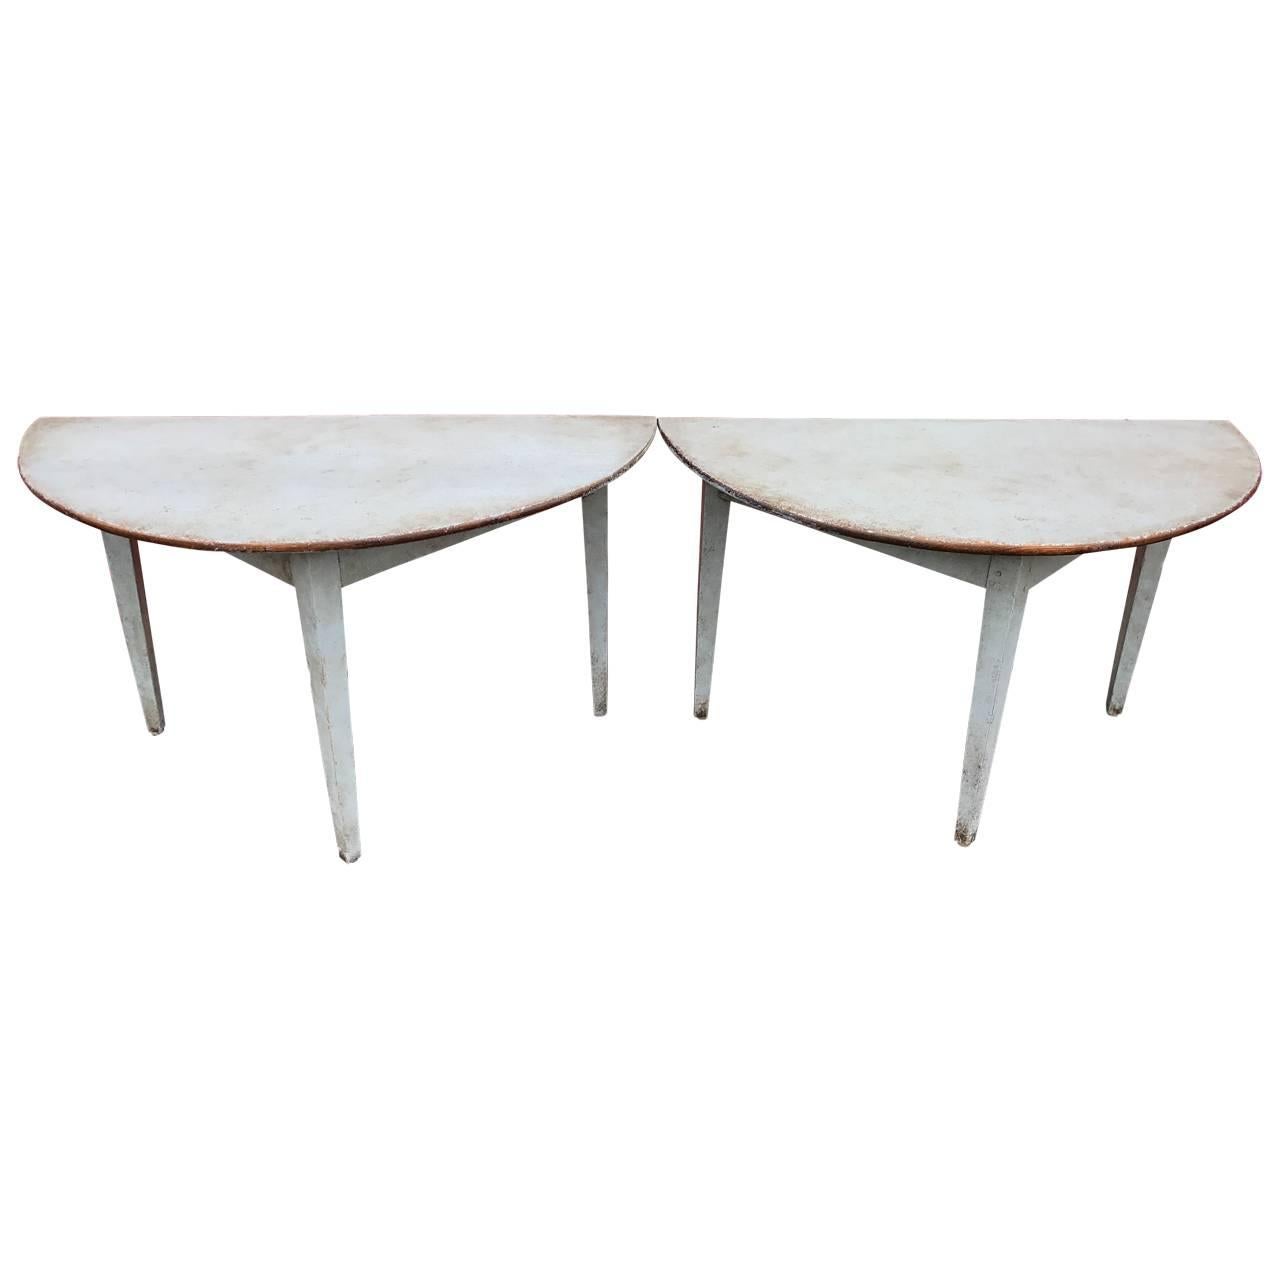 Pair of 19th Century Swedish painted demil-lune tables. This pair of Swedish demi-lune tables are beautiful and quite unusual. The subtle milky grayish white color will be a perfect addition to any eclectic decor. The tables are sturdy yet graceful